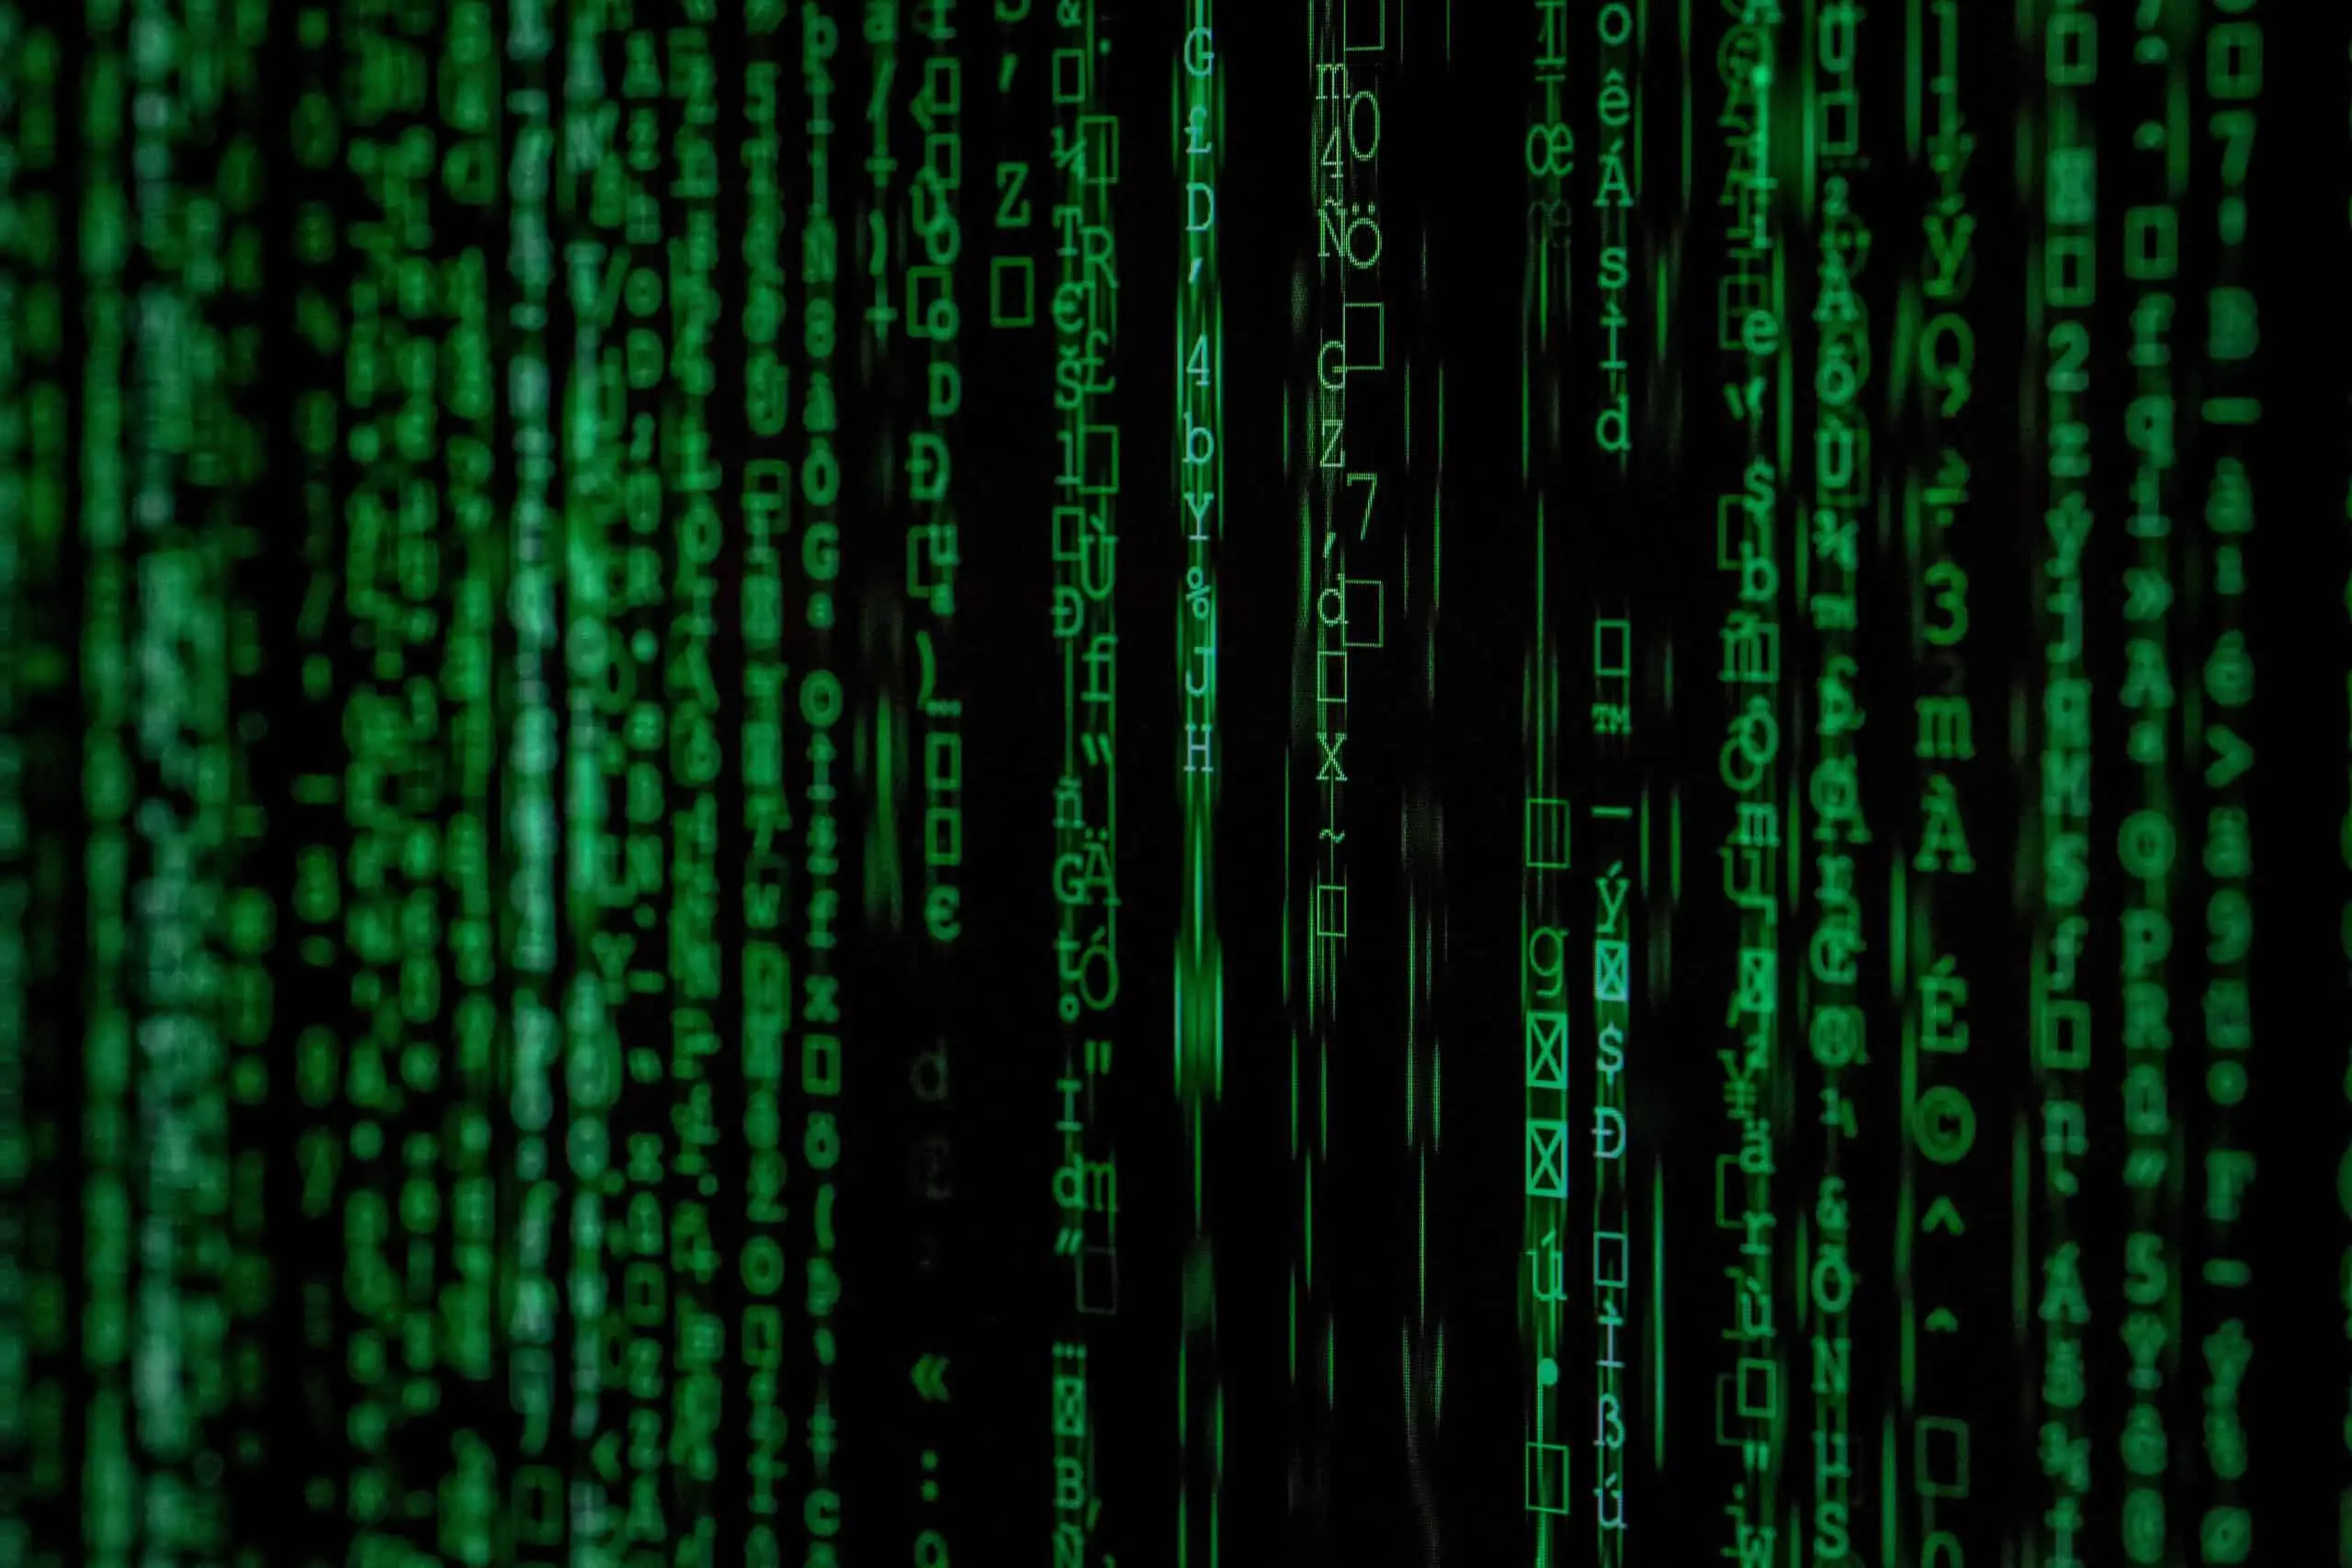 Image of a data download. Looks like the green letters in the Matrix